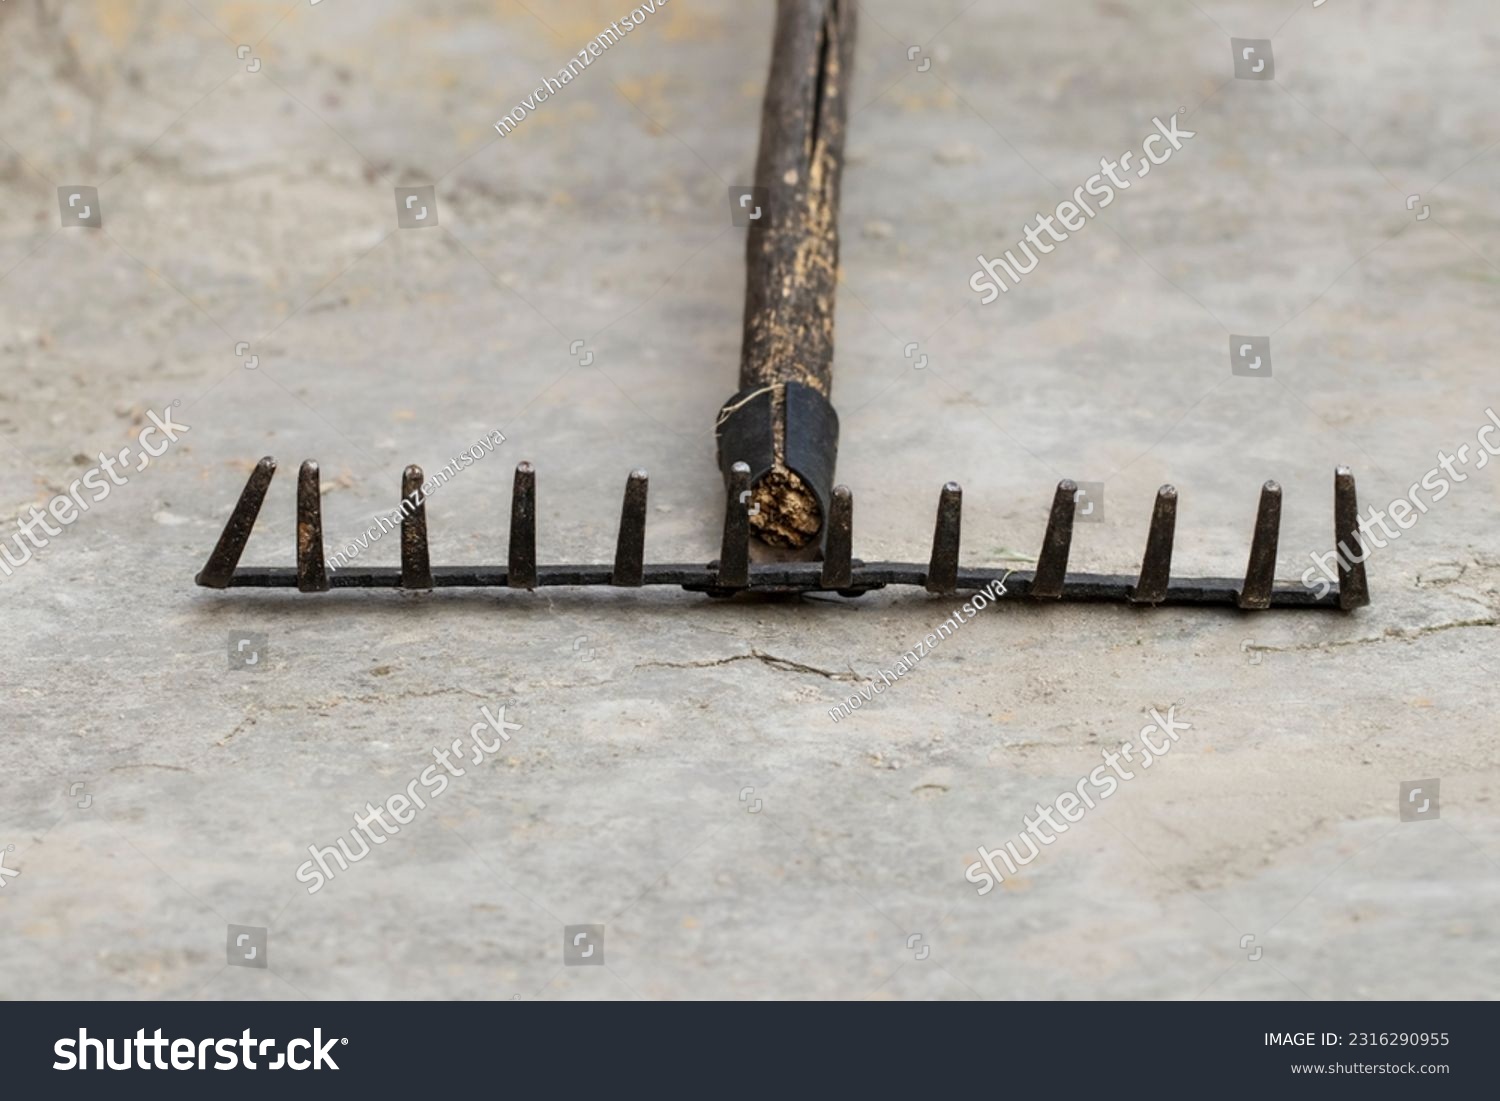 Old metal rake for cleaning leaves and grass, close-up.Yard area cleaning. #2316290955